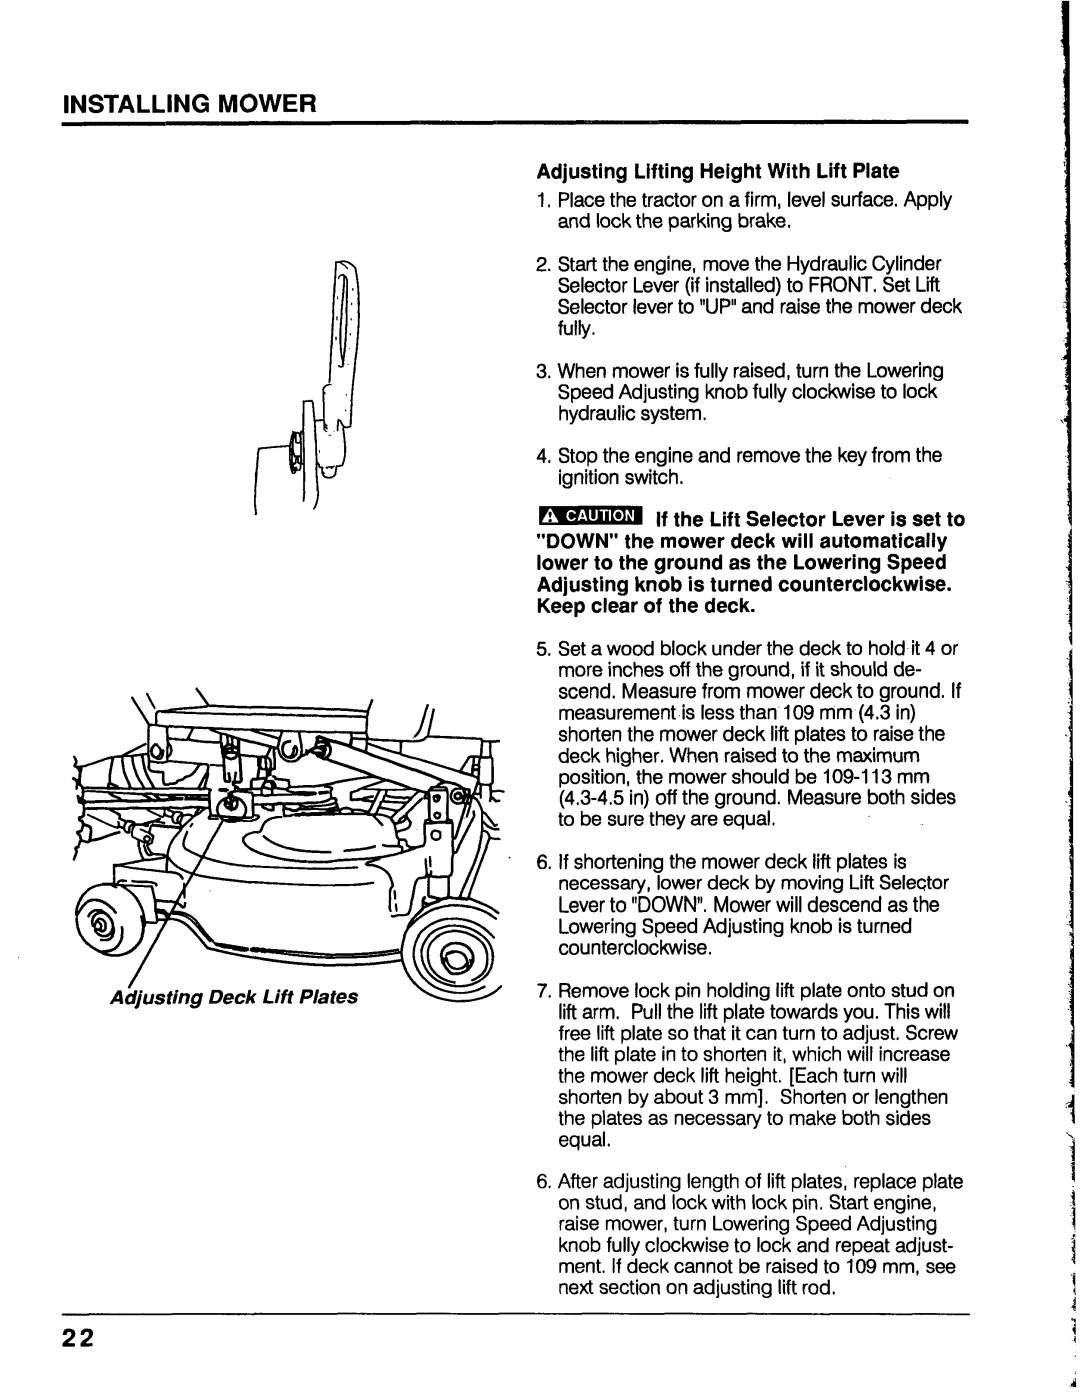 Honda Power Equipment MM52 manual Adjusting Lifting Height With Lift Plate, Installing Mower 